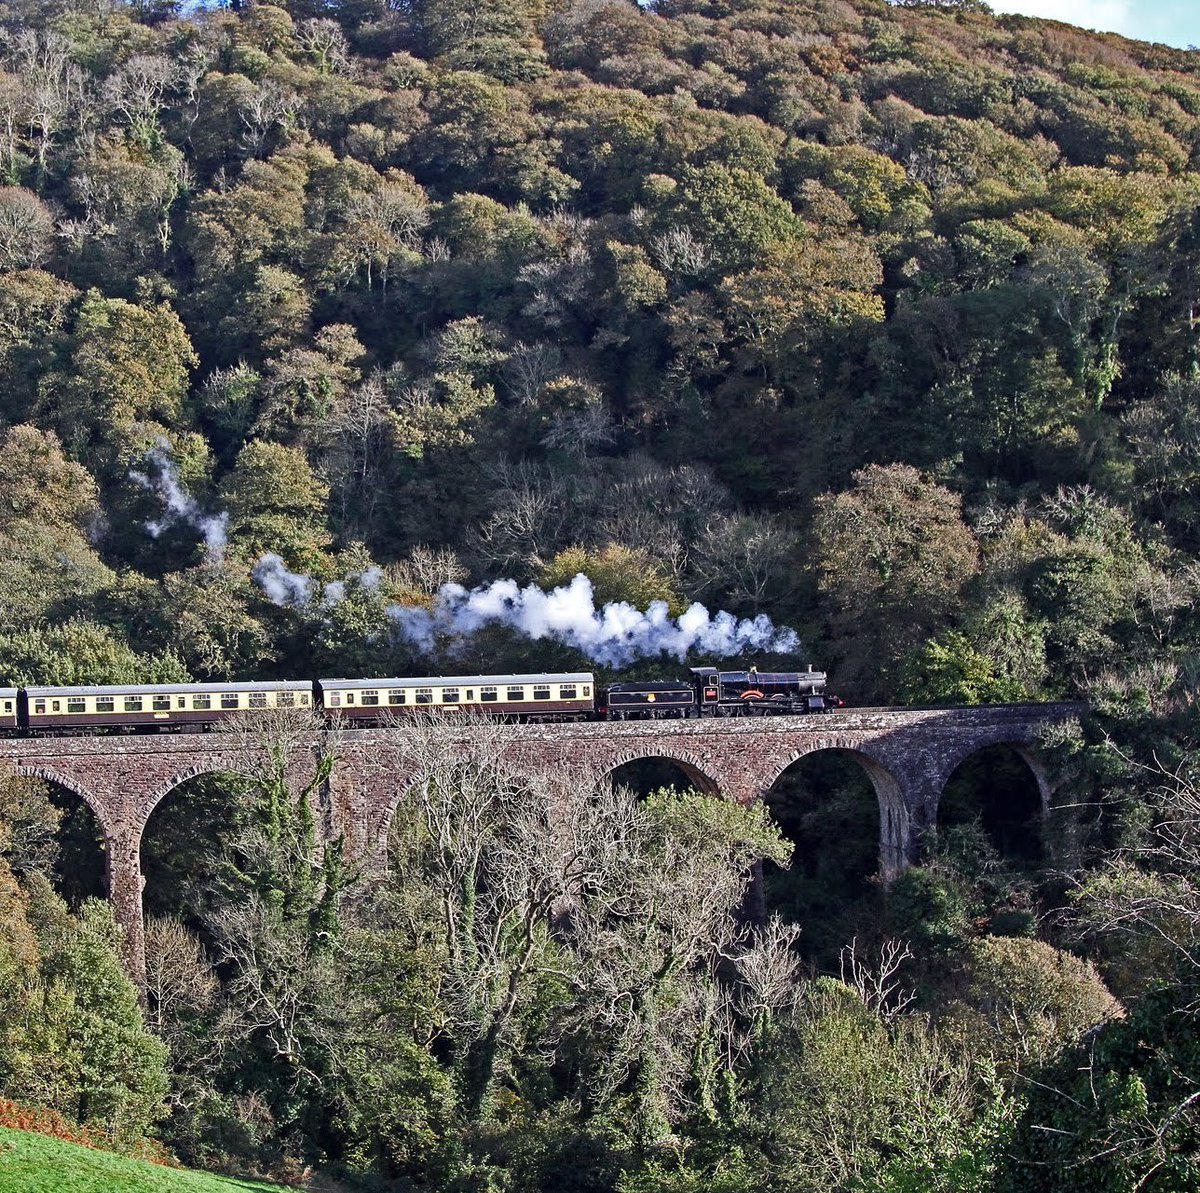 Full steam ahead in to the weekend. 🌳🚂🌳 dartmouthrailriver.co.uk #dartmouthsteamrailway